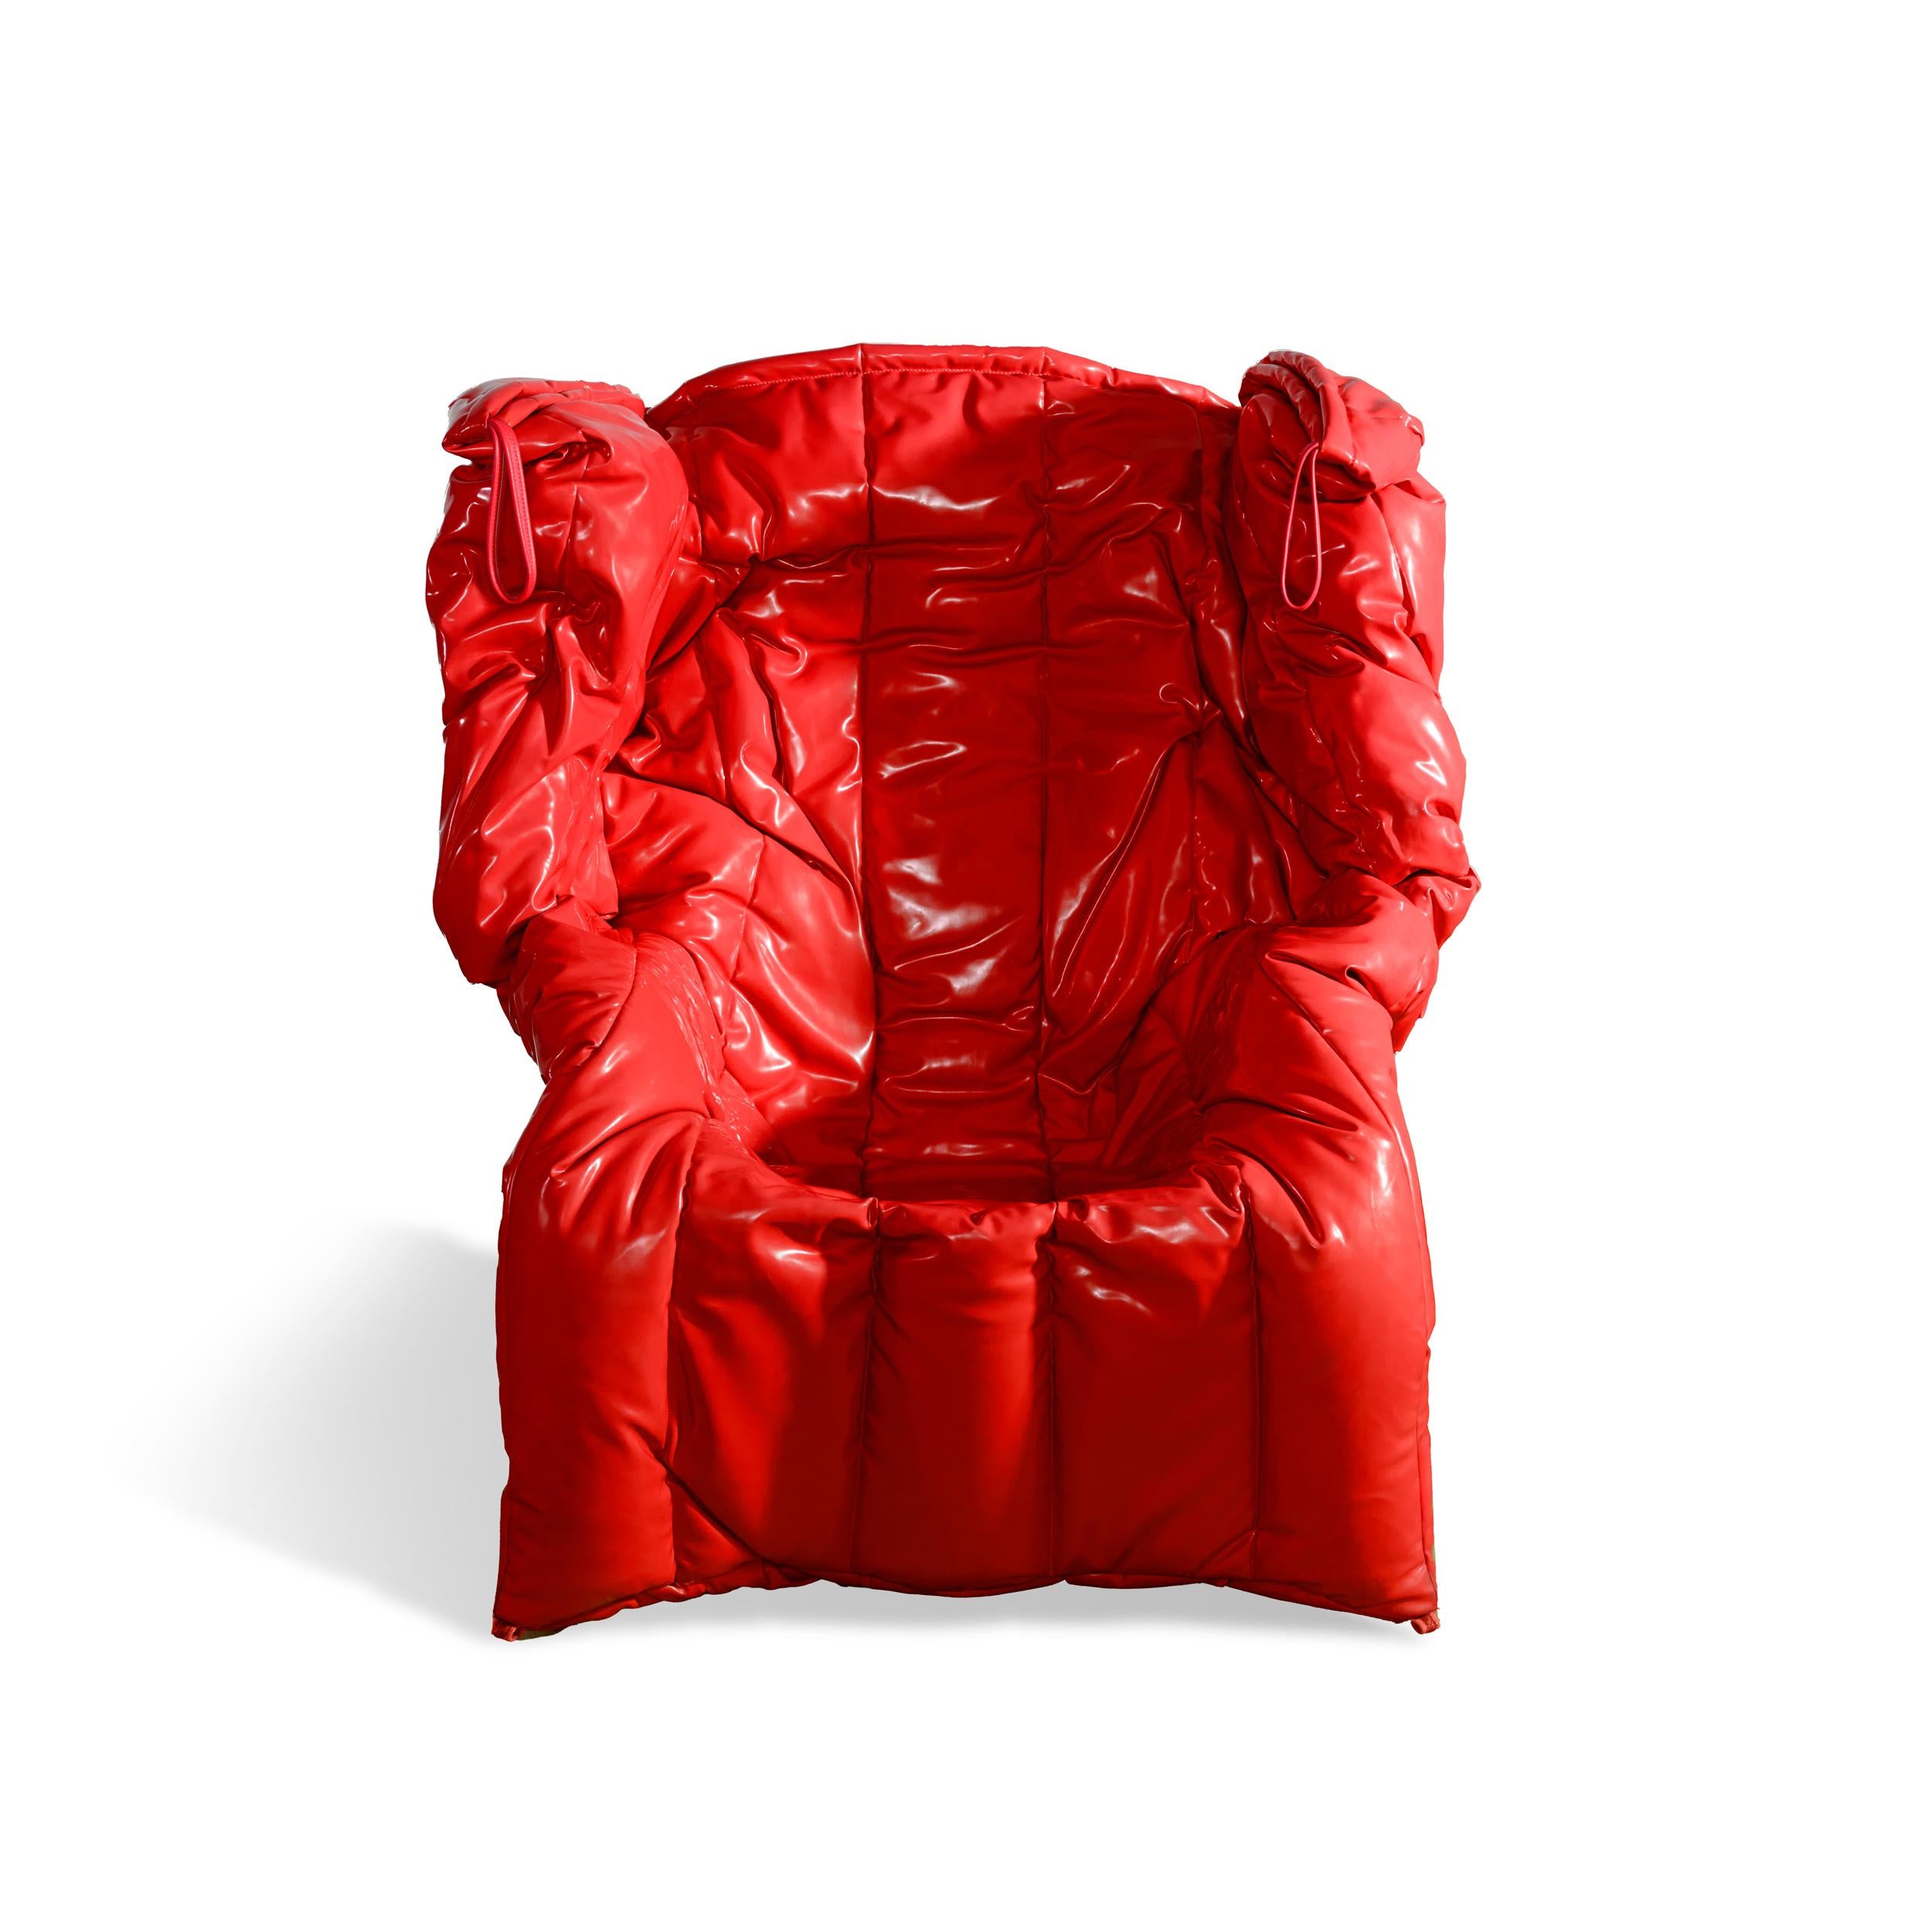 Italian Shadow Armchair by Gaetano Pesce - Red For Sale